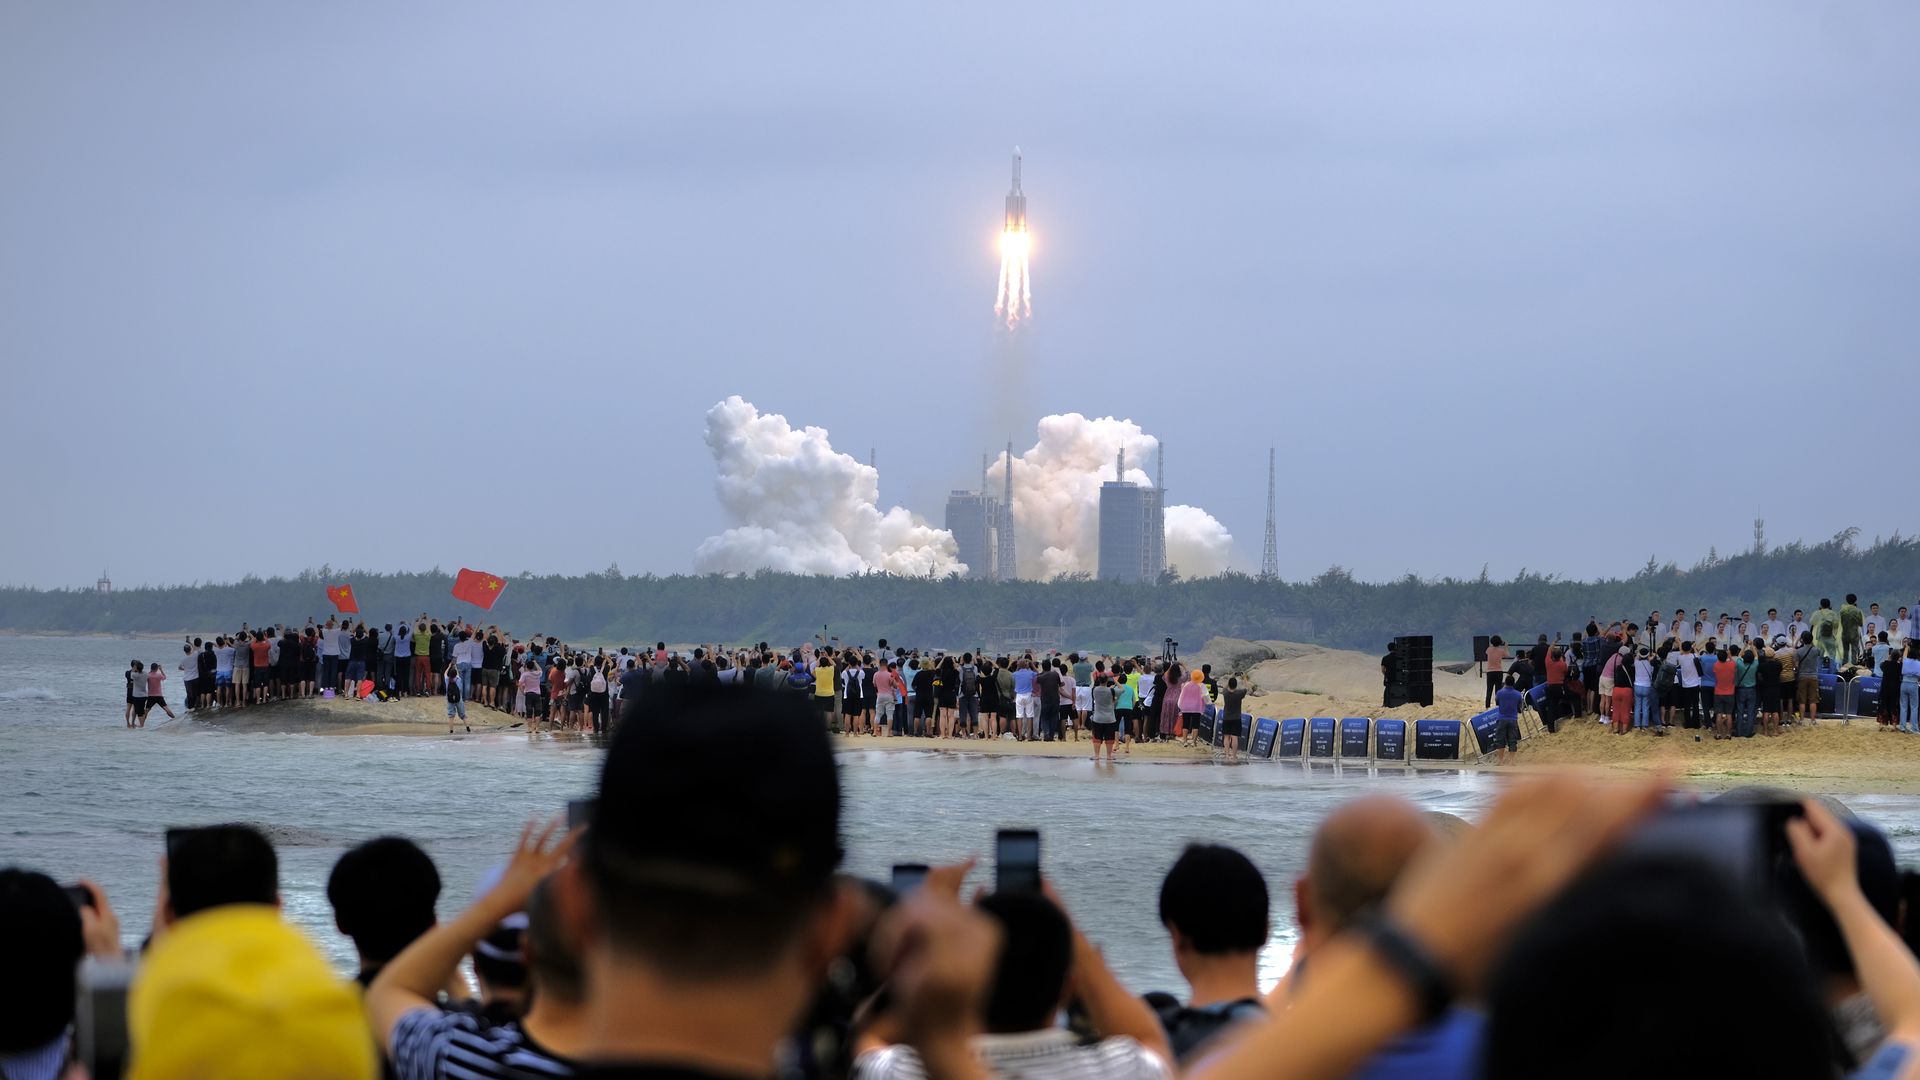  People watch the Long March-5B Y2 rocket carrying the core module of China's space station, Tianhe, blasting off from the Wenchang Spacecraft Launch Site on April 29